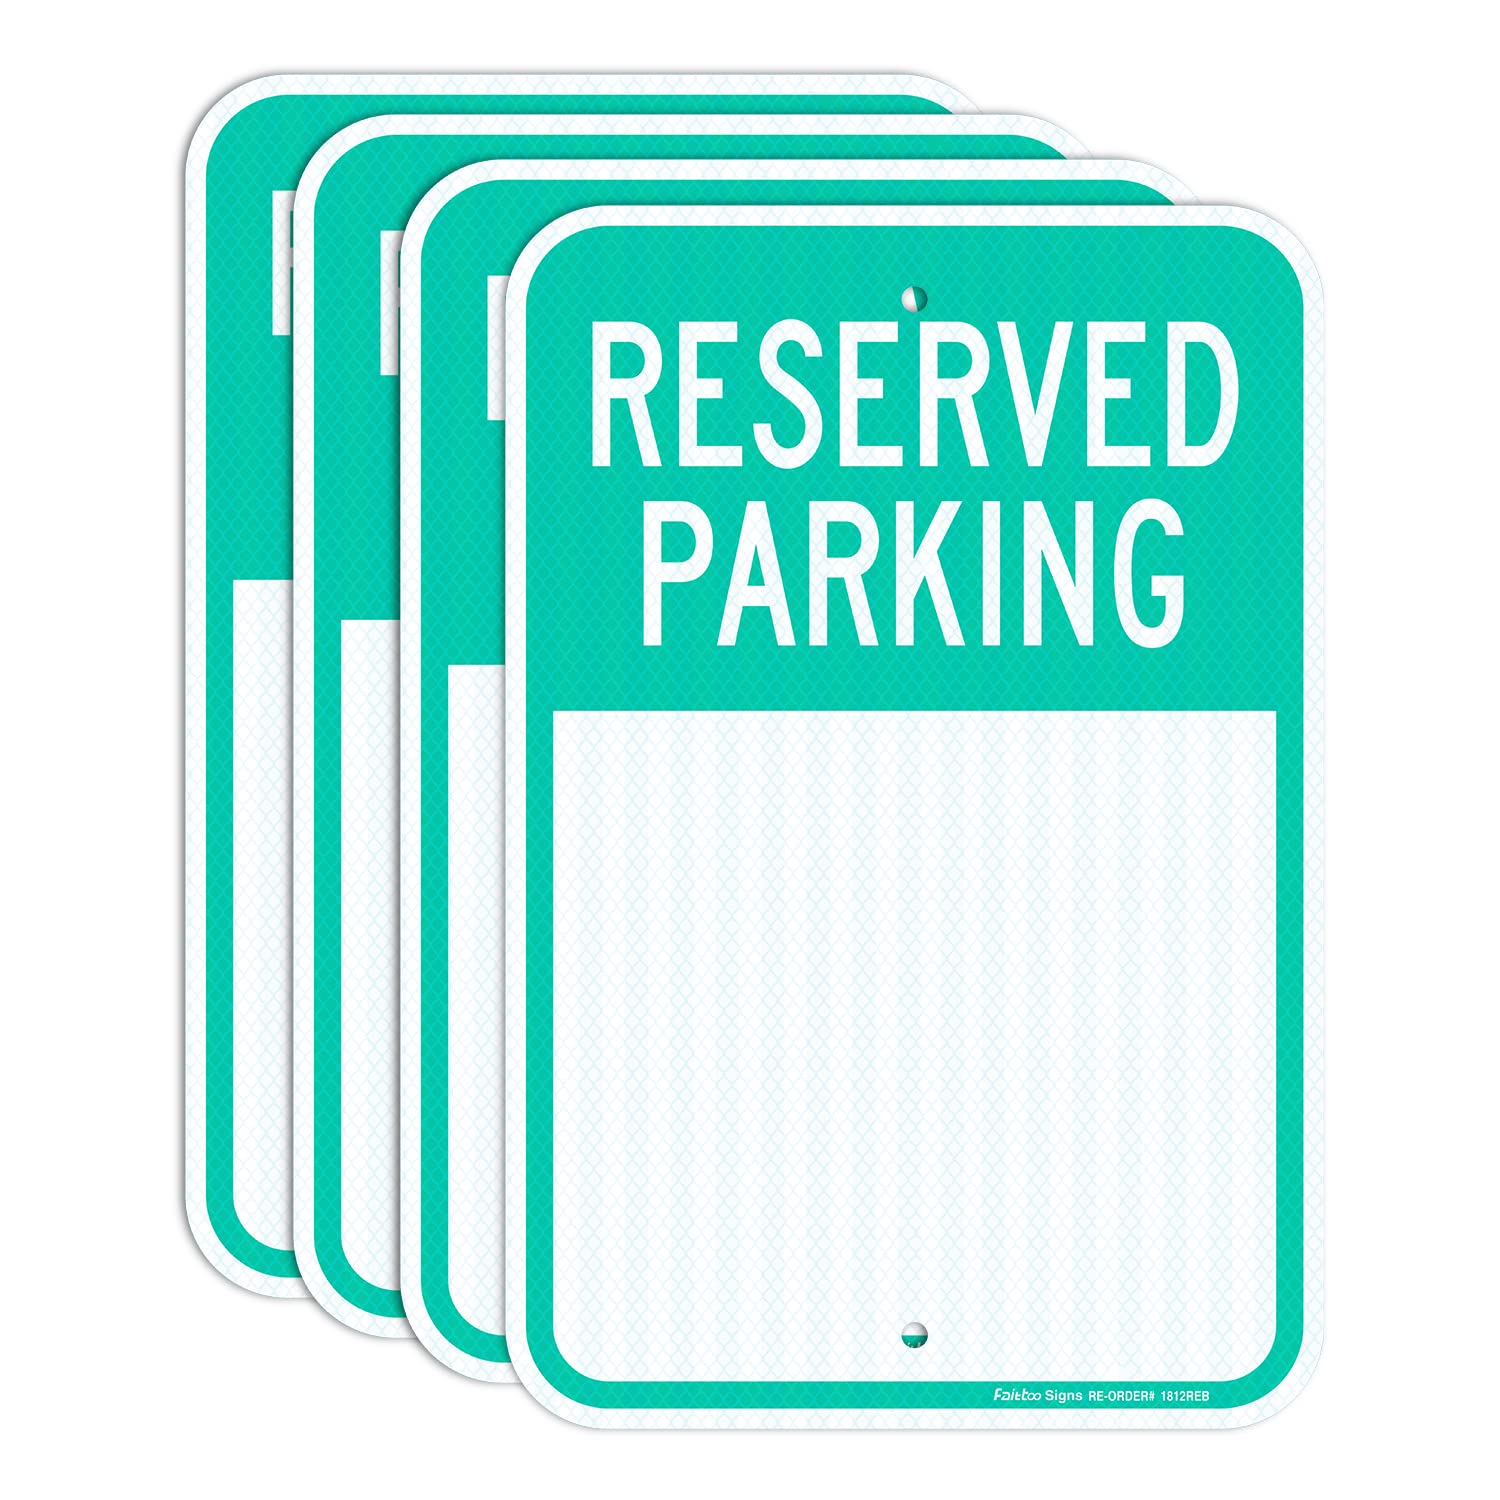 Faittoo Blank Reserved Parking Sign,18 x 12 Inch Engineer Grade Reflective Aluminum, Weather/Fade Resistant, UV Protected, Easy to Install and Read, Indoor/Outdoors Use